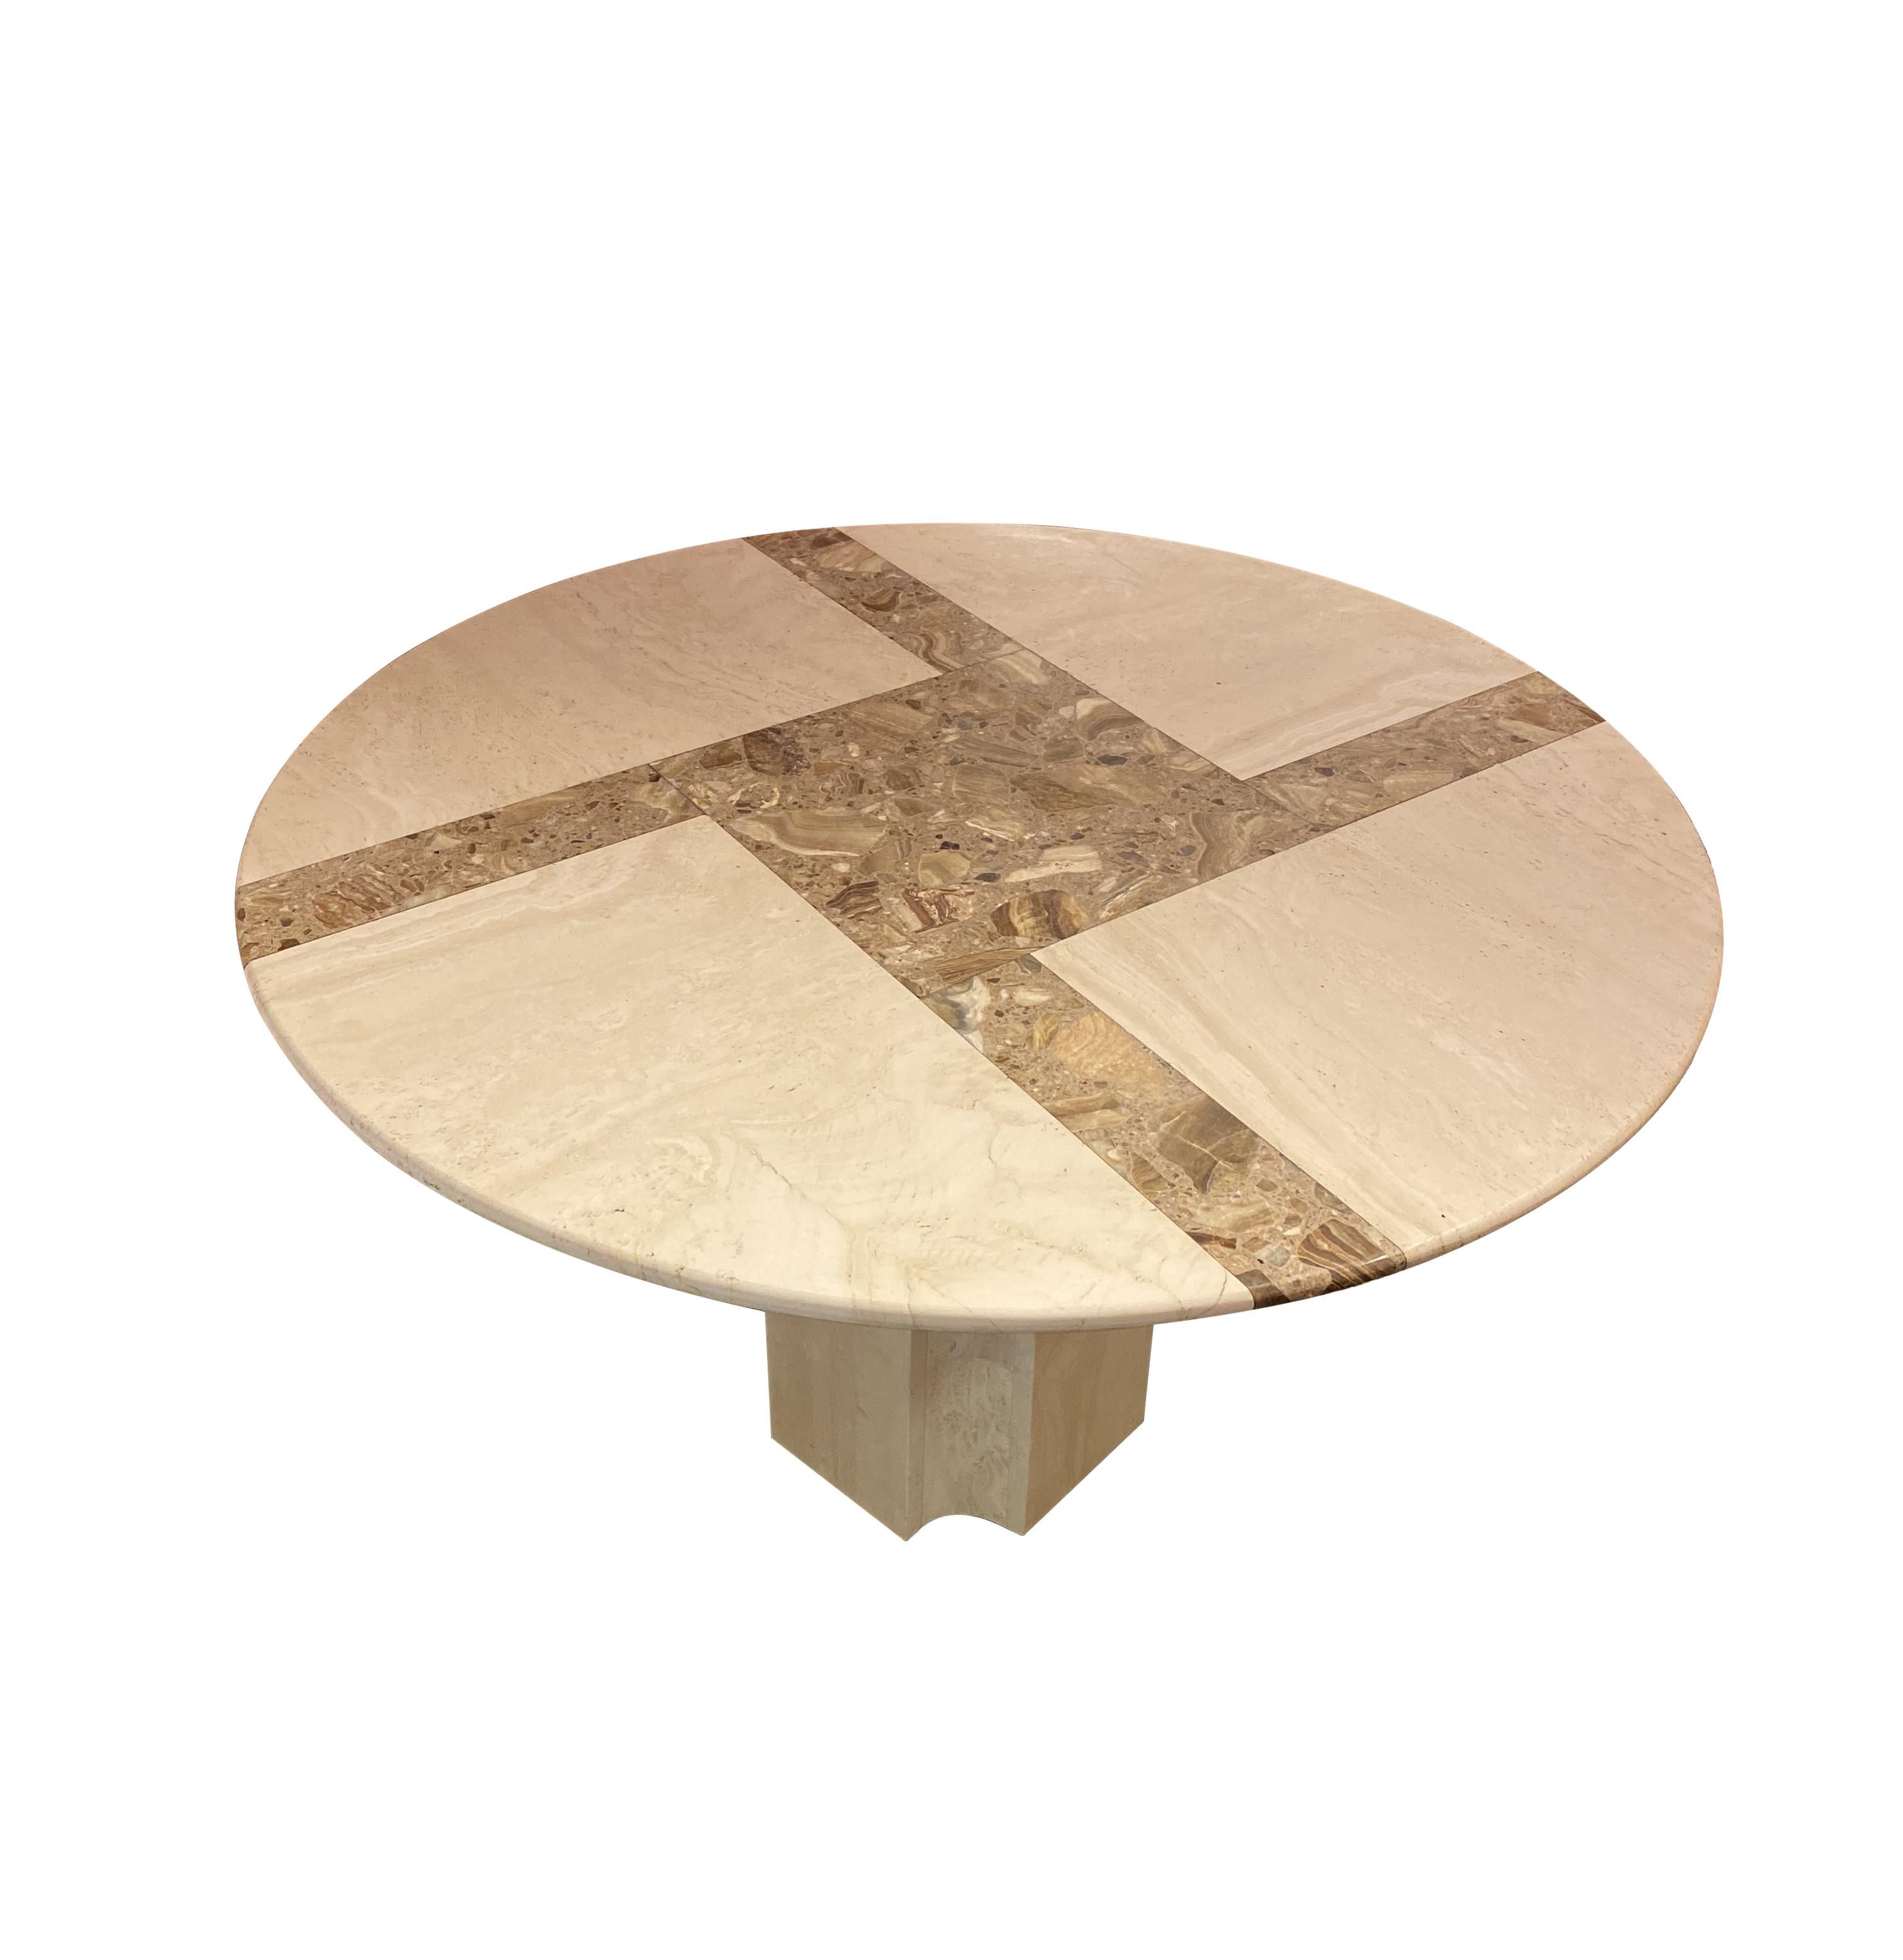 Exceptional round table on pedestal in travertine and Onyx. Top of 2 cm thick with geometric inlay decoration. 
Italian design, Circa 70. 

Good condition. 

Size: height: 72 Diameter: 119 cm
Pedestal: Width: 32 Depth: 36 cm.
  